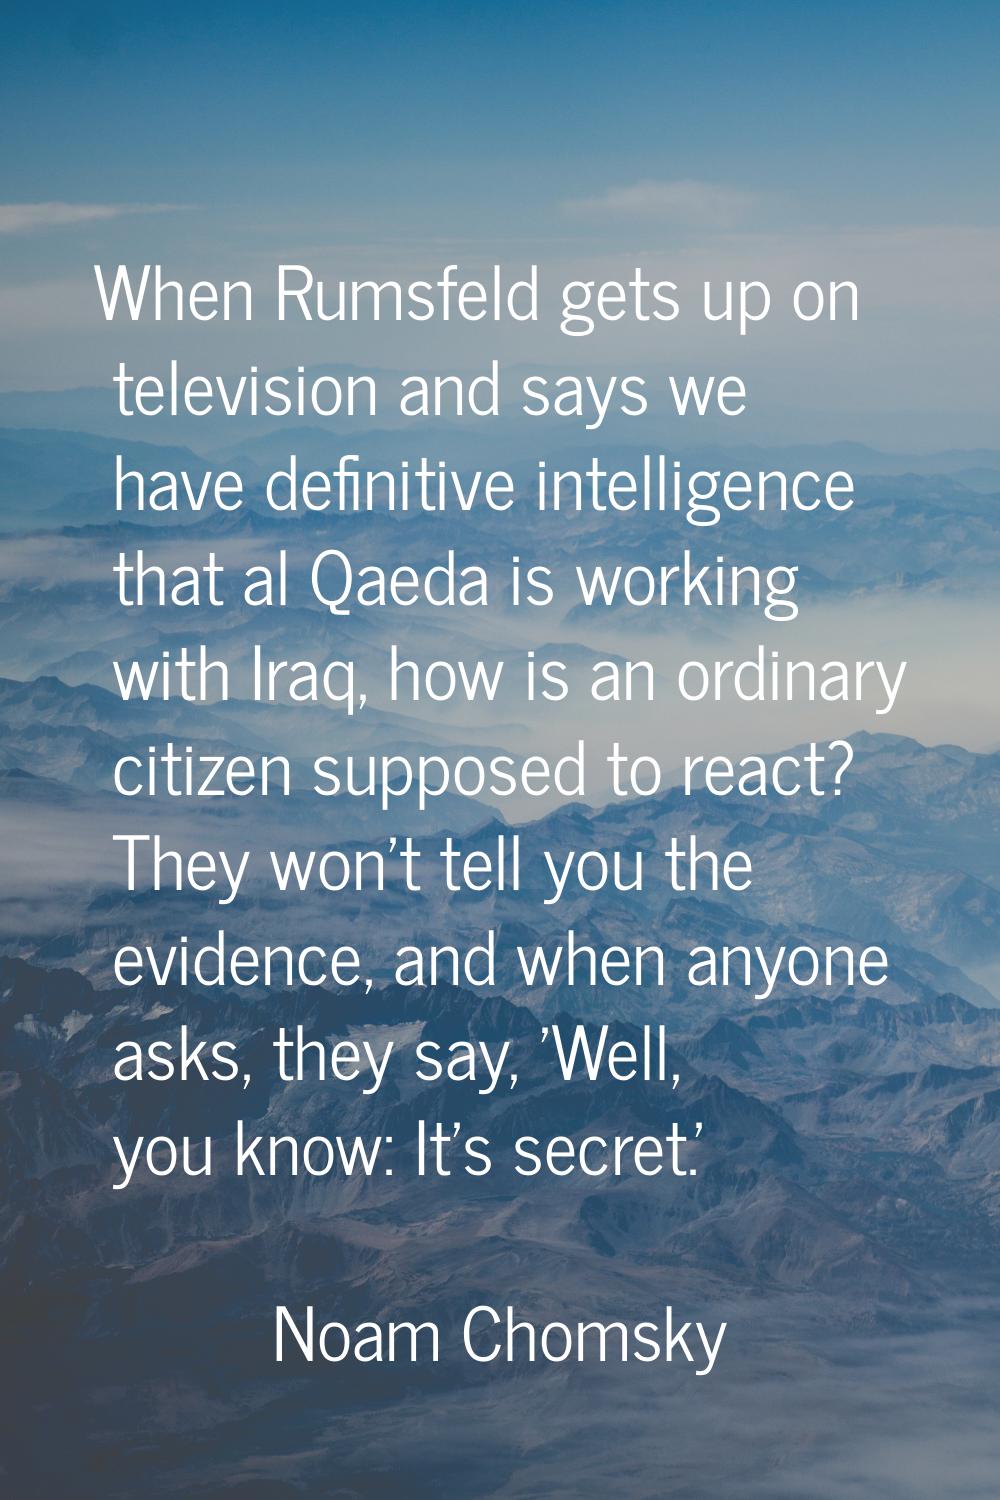 When Rumsfeld gets up on television and says we have definitive intelligence that al Qaeda is worki